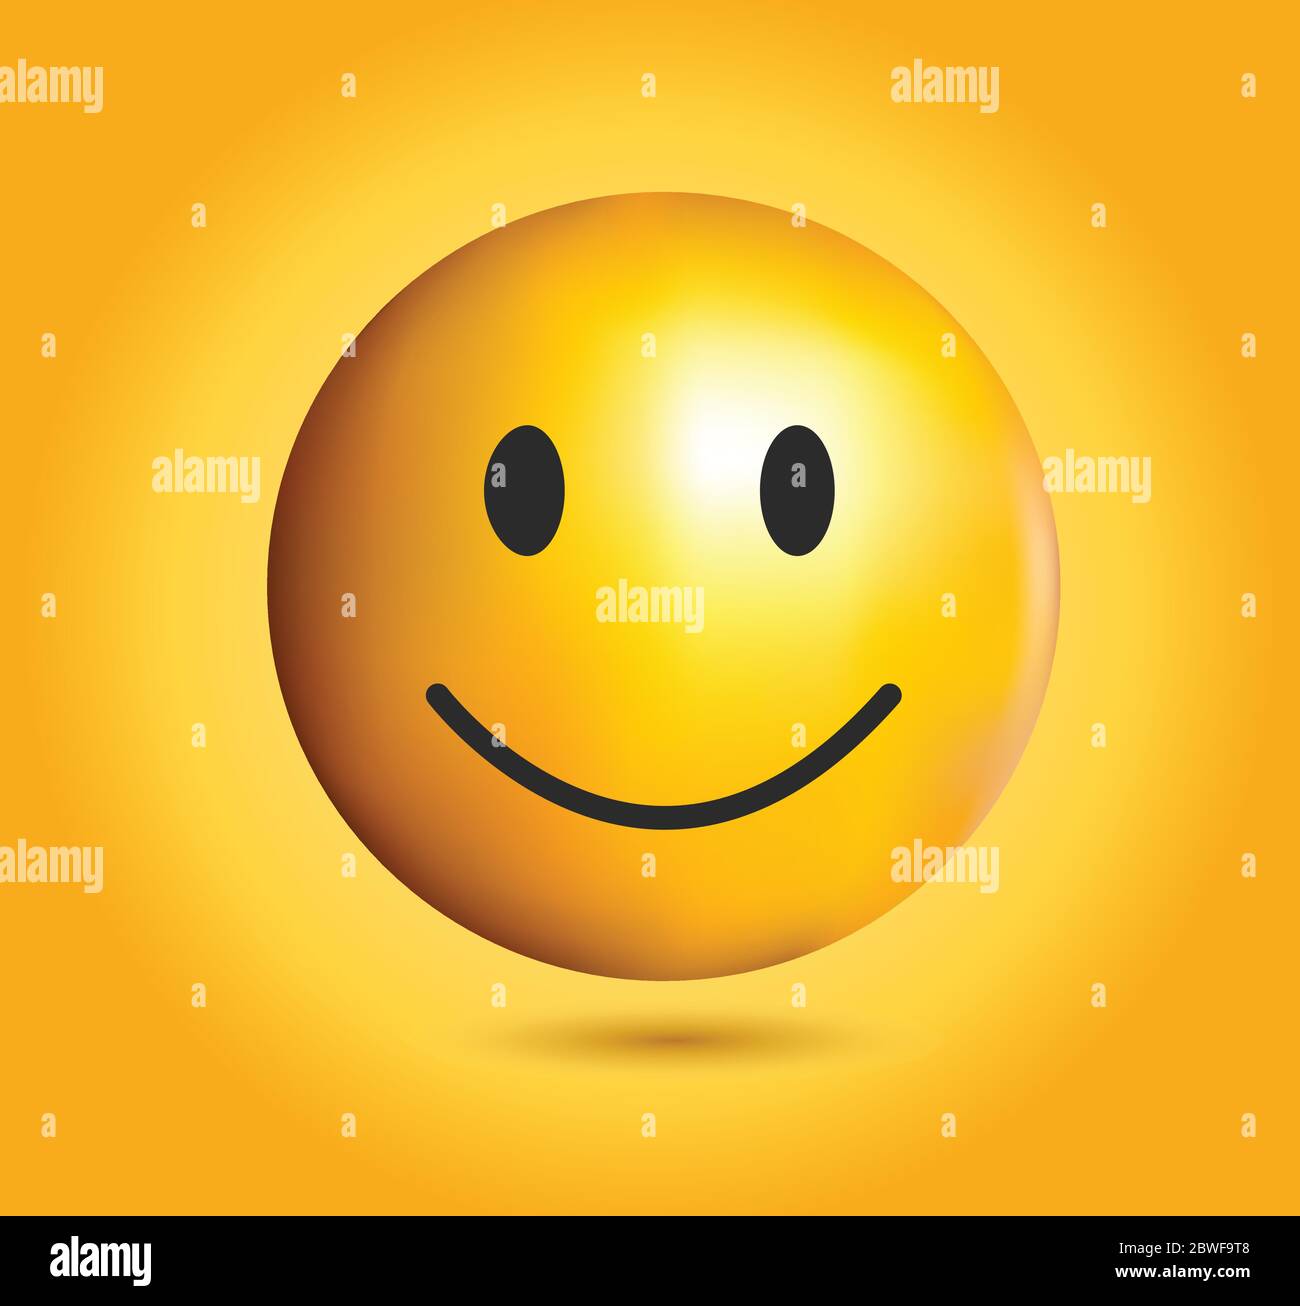 Free Illustrations - A Bright Yellow Smiley Face, With The Mouth Open, And  A Big Smile On Its Face. The Background Is Dark, Emphasizing The Glowing  Effect Of The Happy Emoticon.